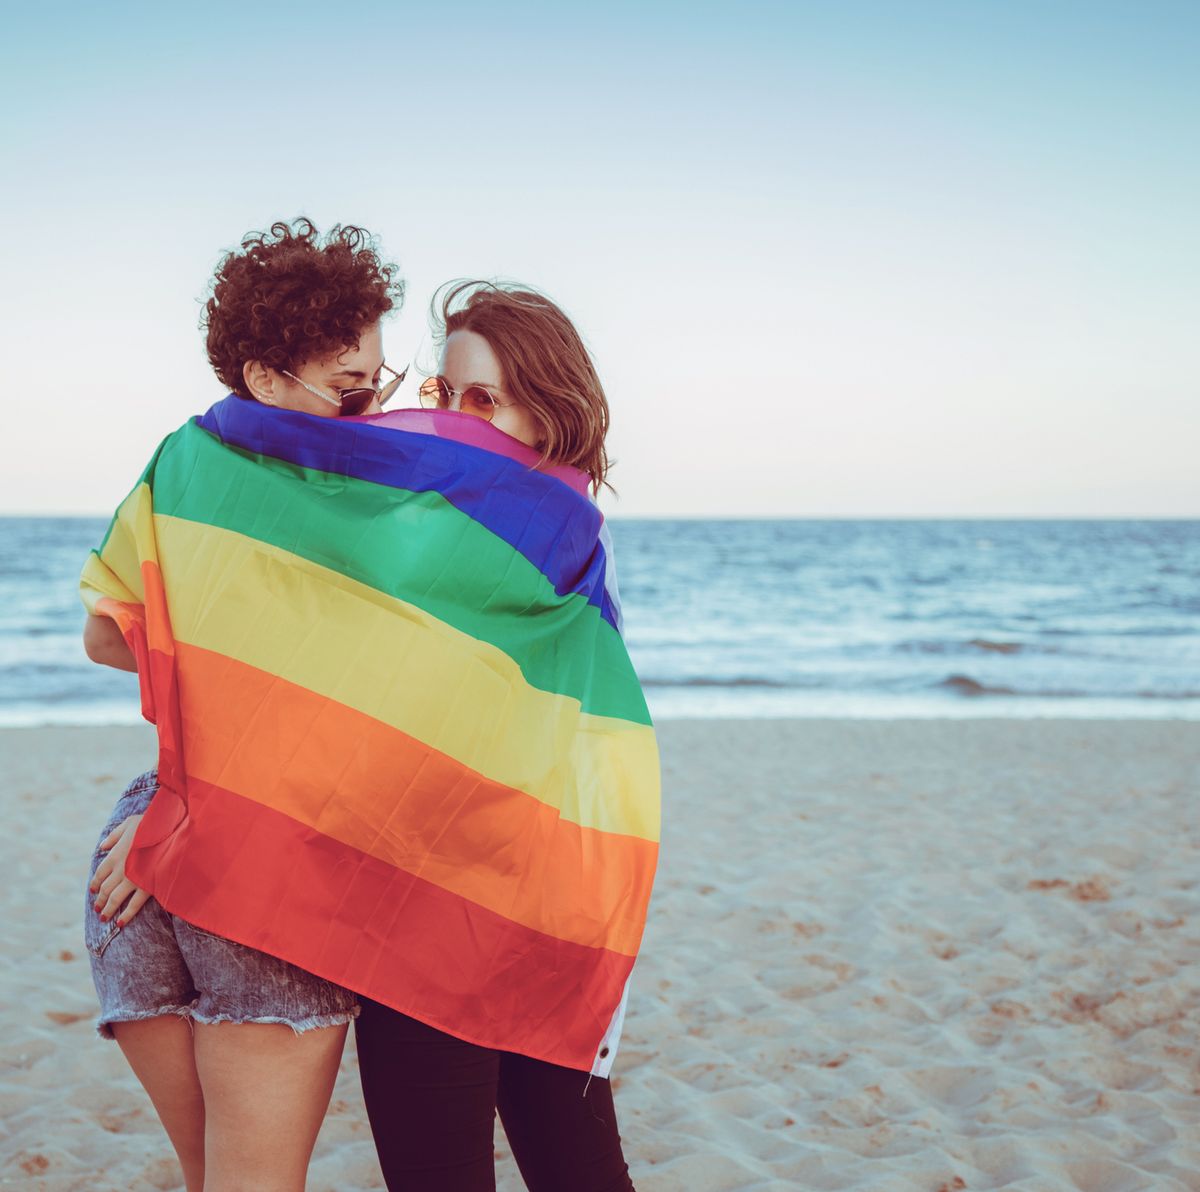 Am I Bisexual?' 10 Bisexuality Signs, According To Experts